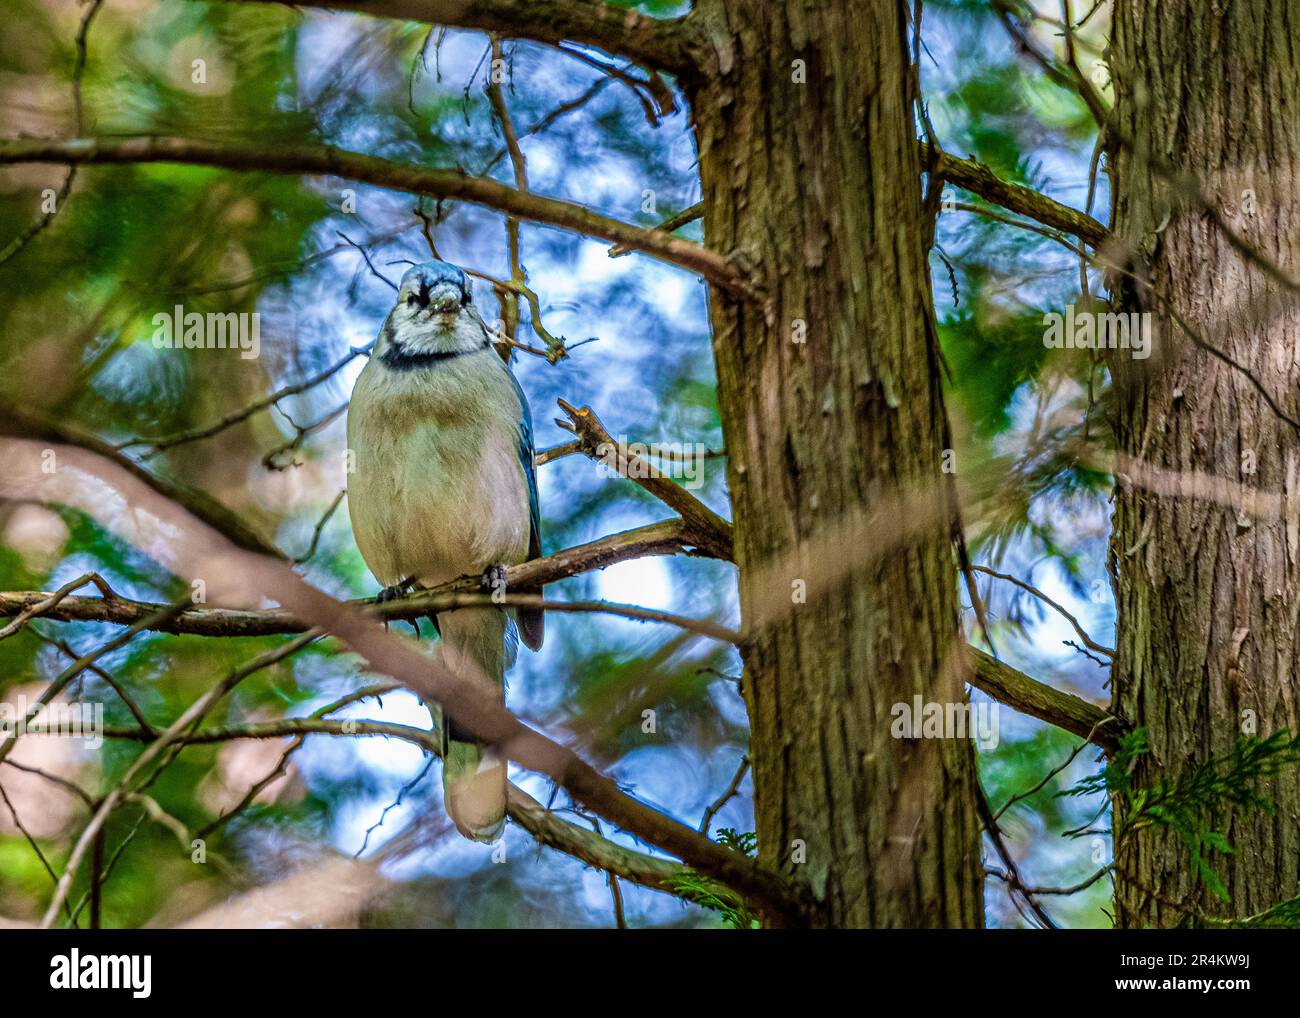 Blue jay on a branch in the forest. Birds of Canada. In a Canadian forest, I met a bird, the symbol of the Blue Jay baseball team from Toronto. Stock Photo